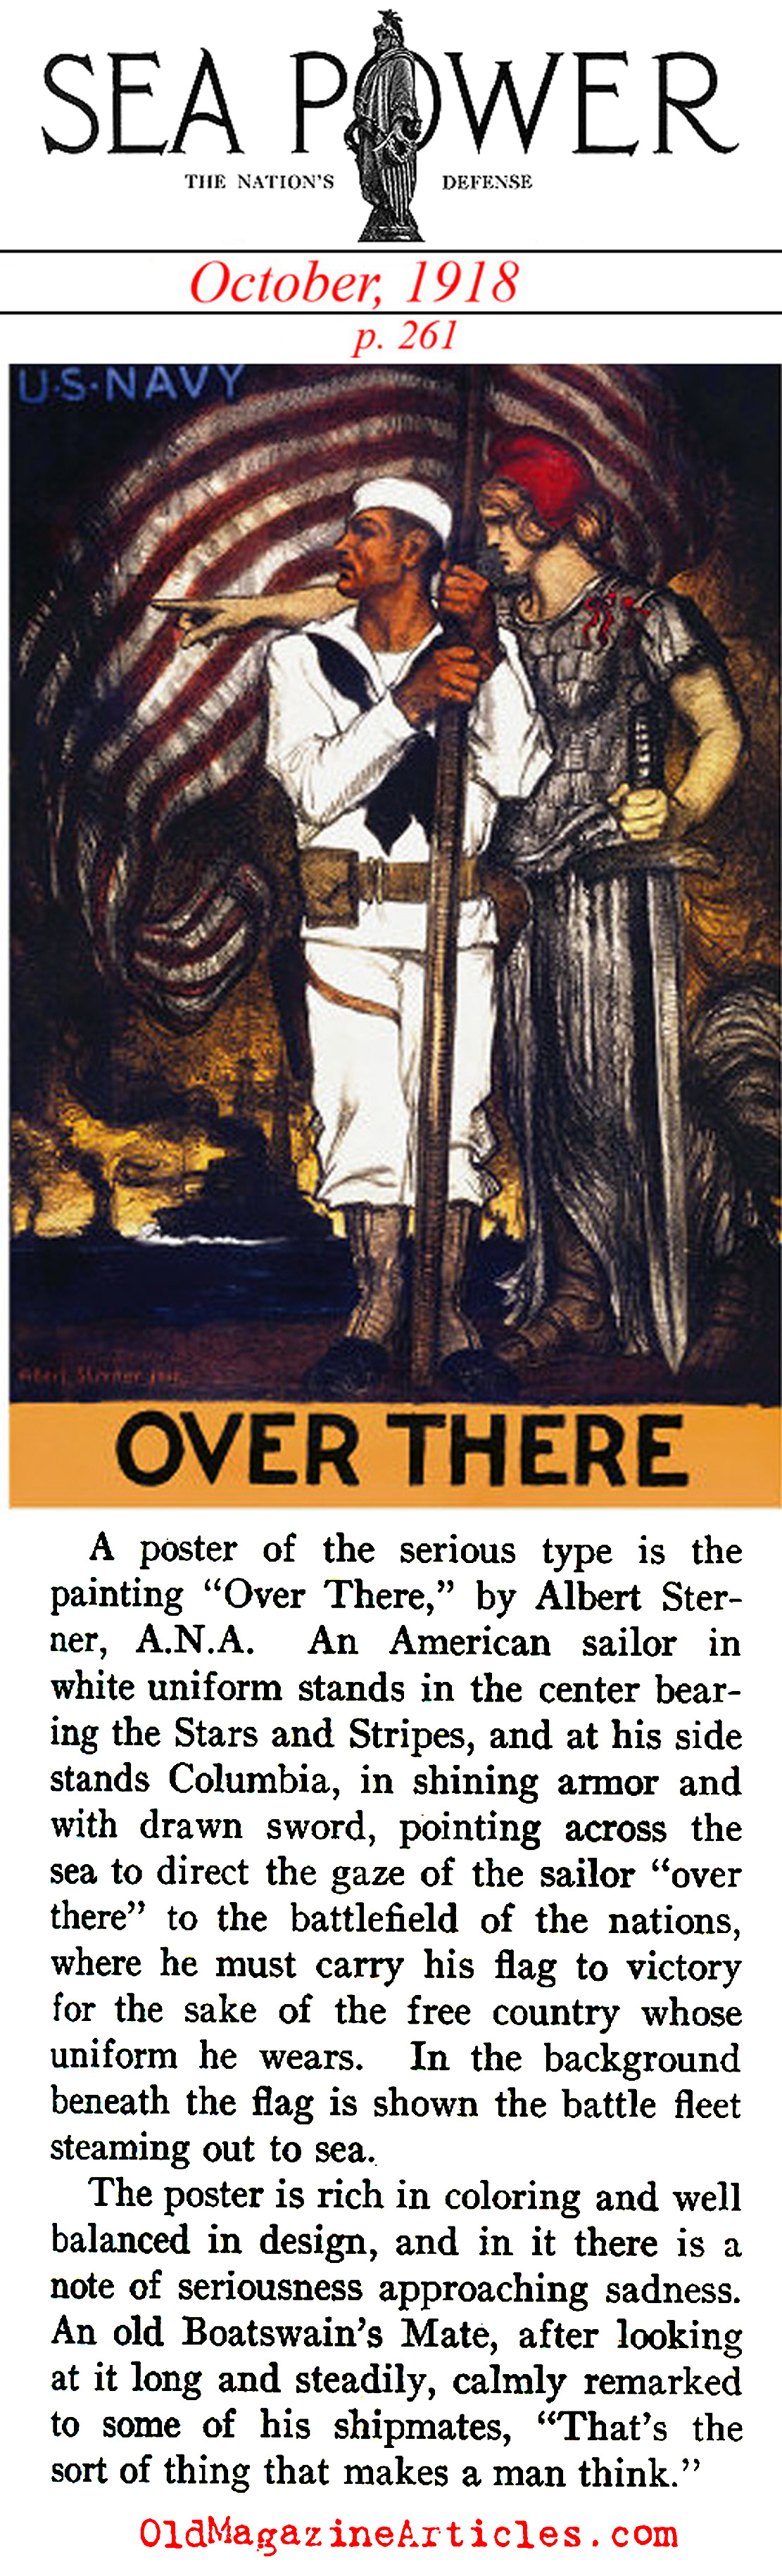 'Over There' by Albert Sterner (Sea Power Magazine, 1918)